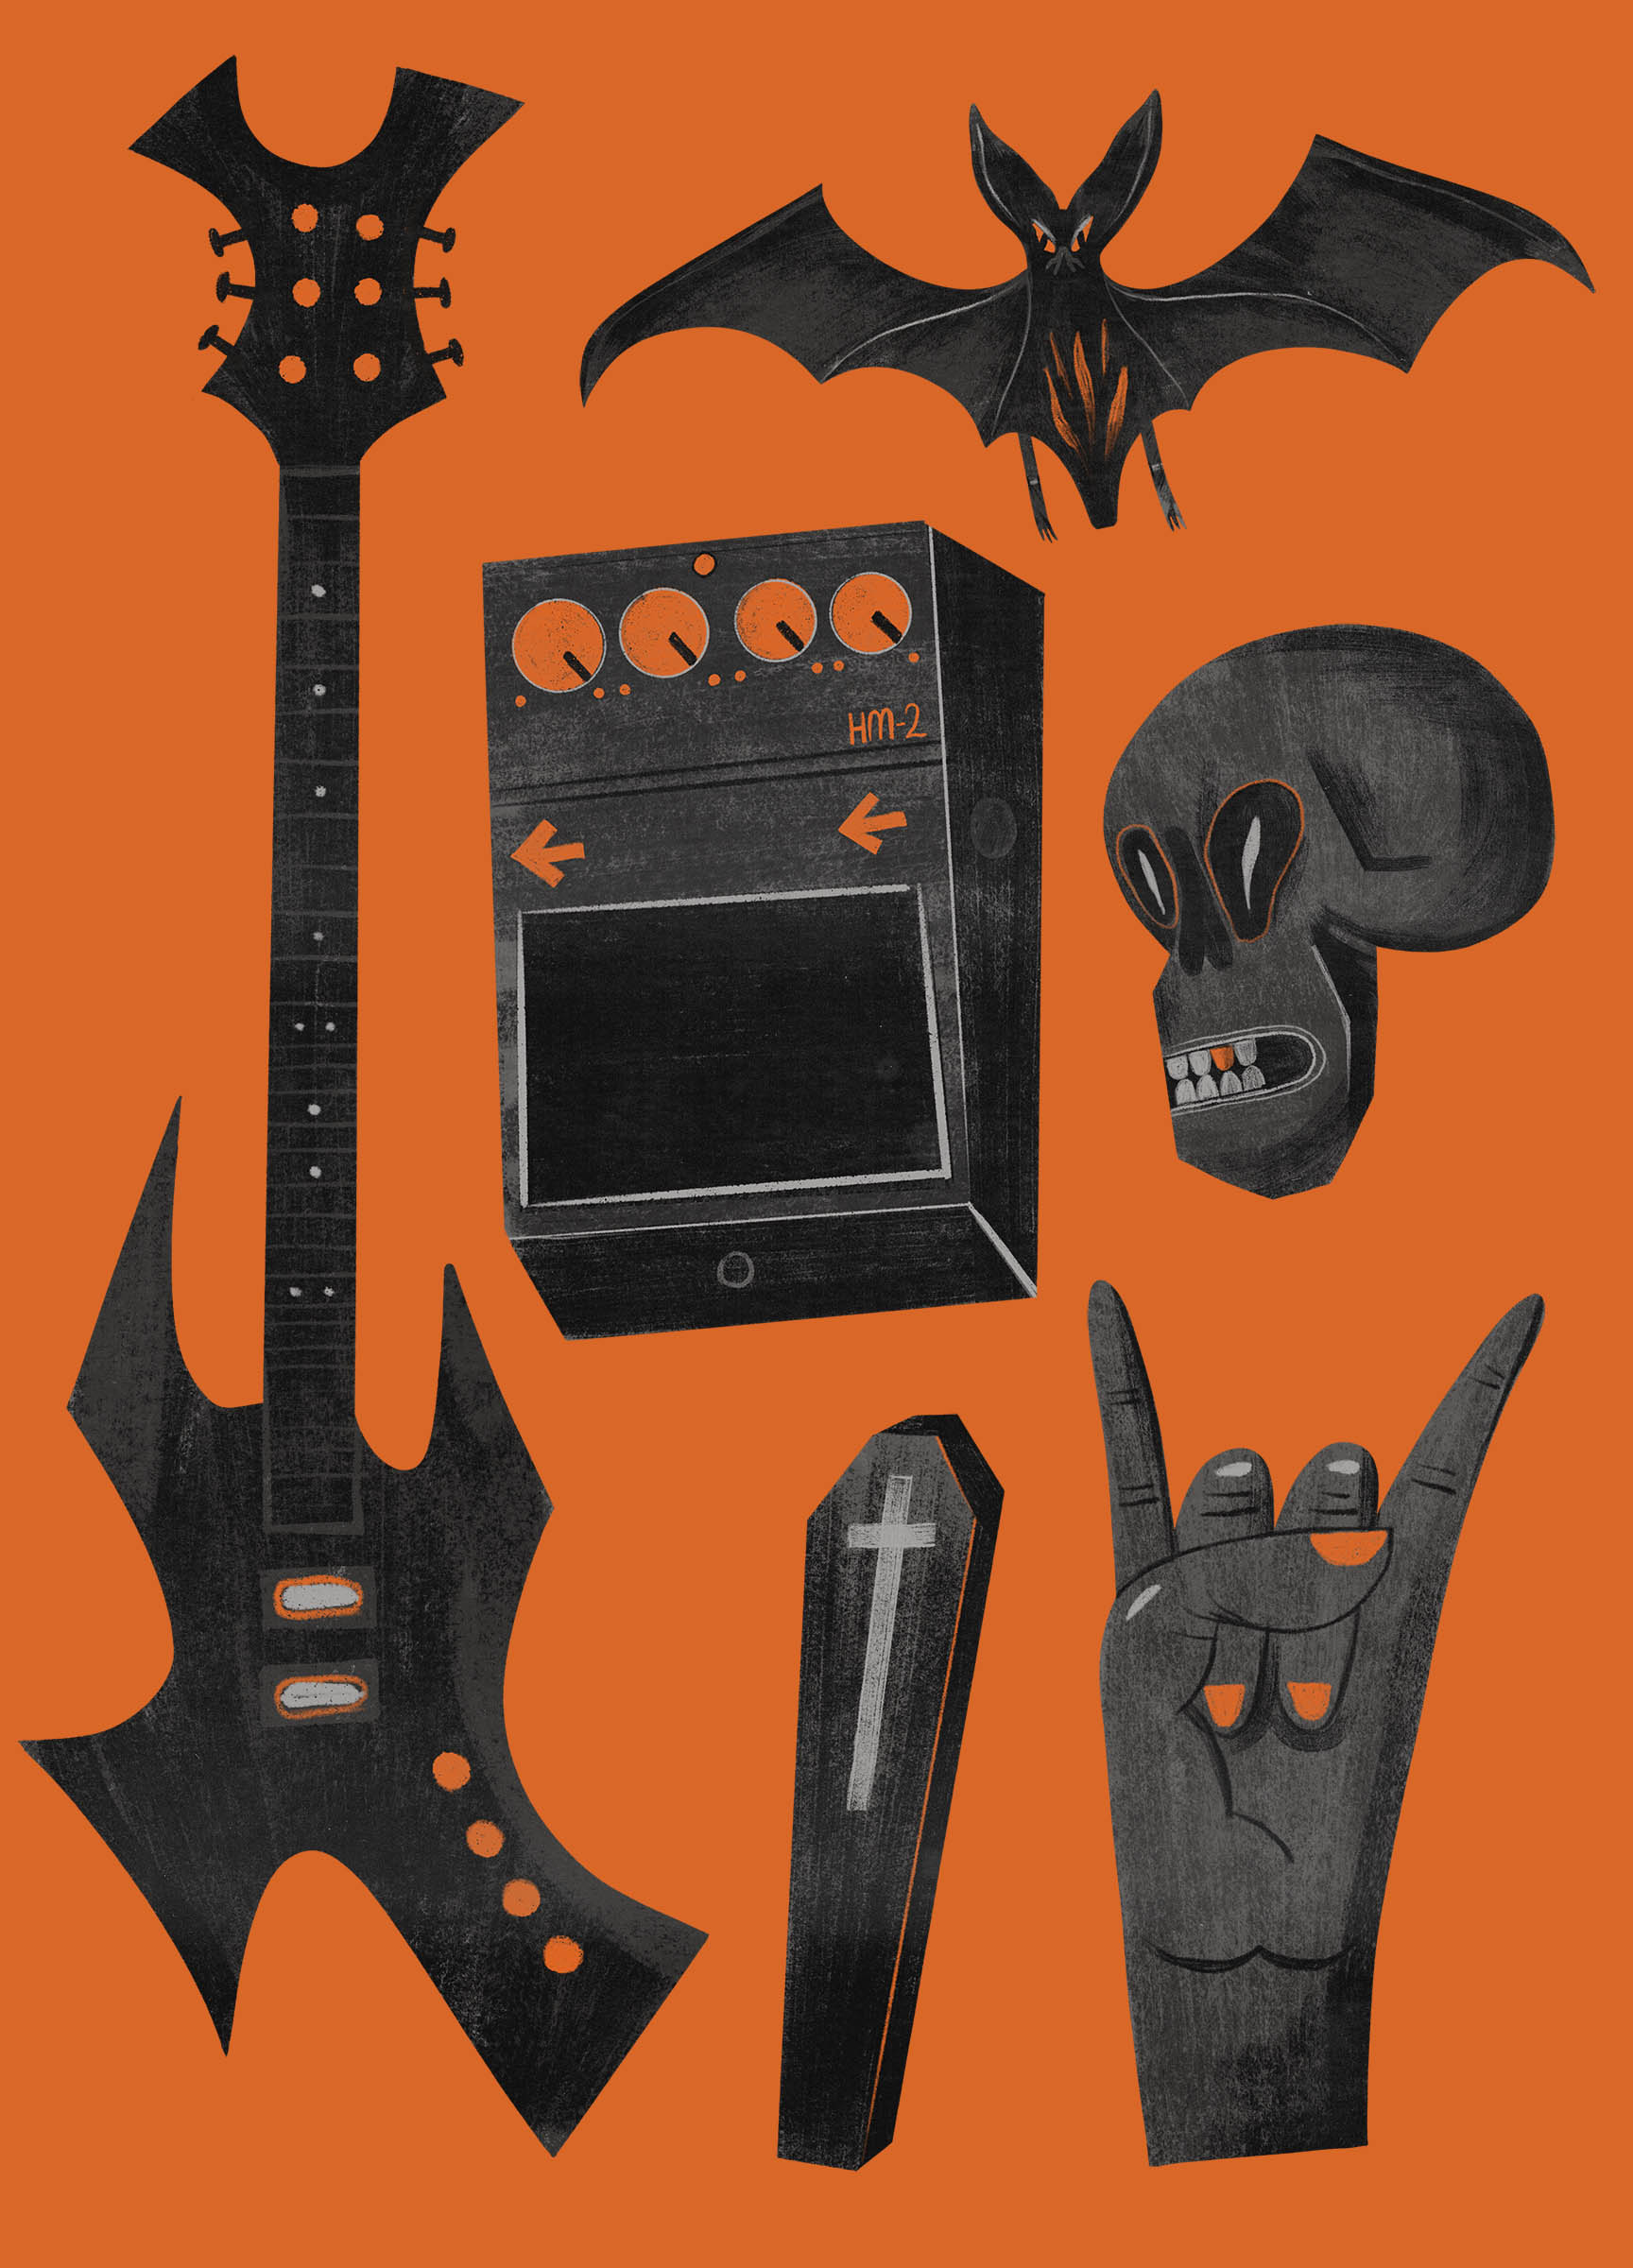 Famous Death Metal symbols - a guitar, the heavy metal pedal, a bat, a skull, a chest and a hand making the devil symbol